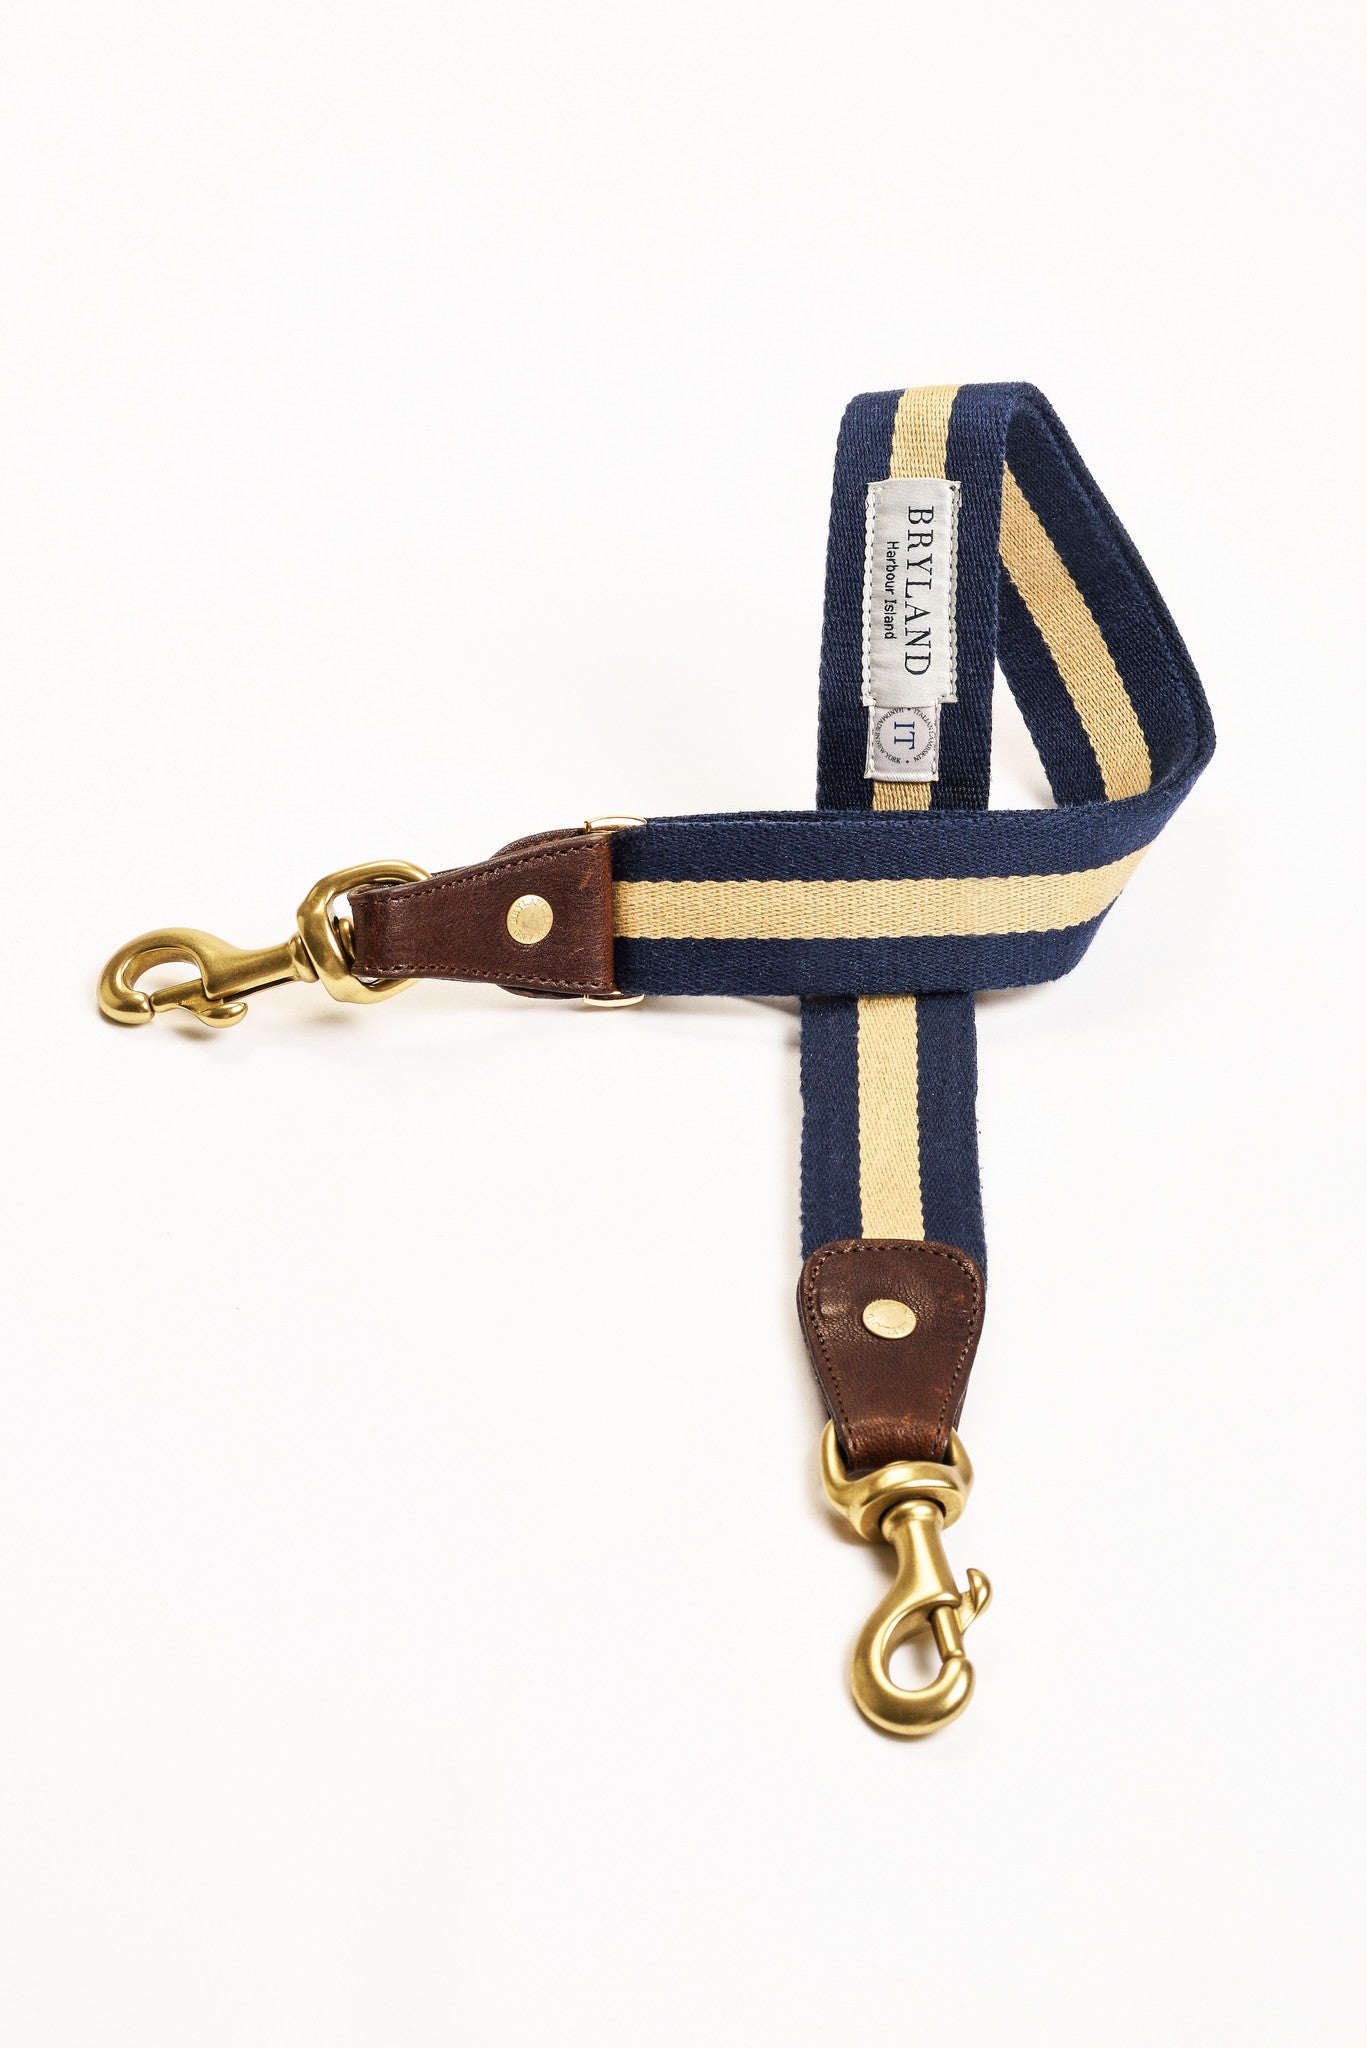 Navy and Gold Stripe - Italian Leather Belt - Bryland